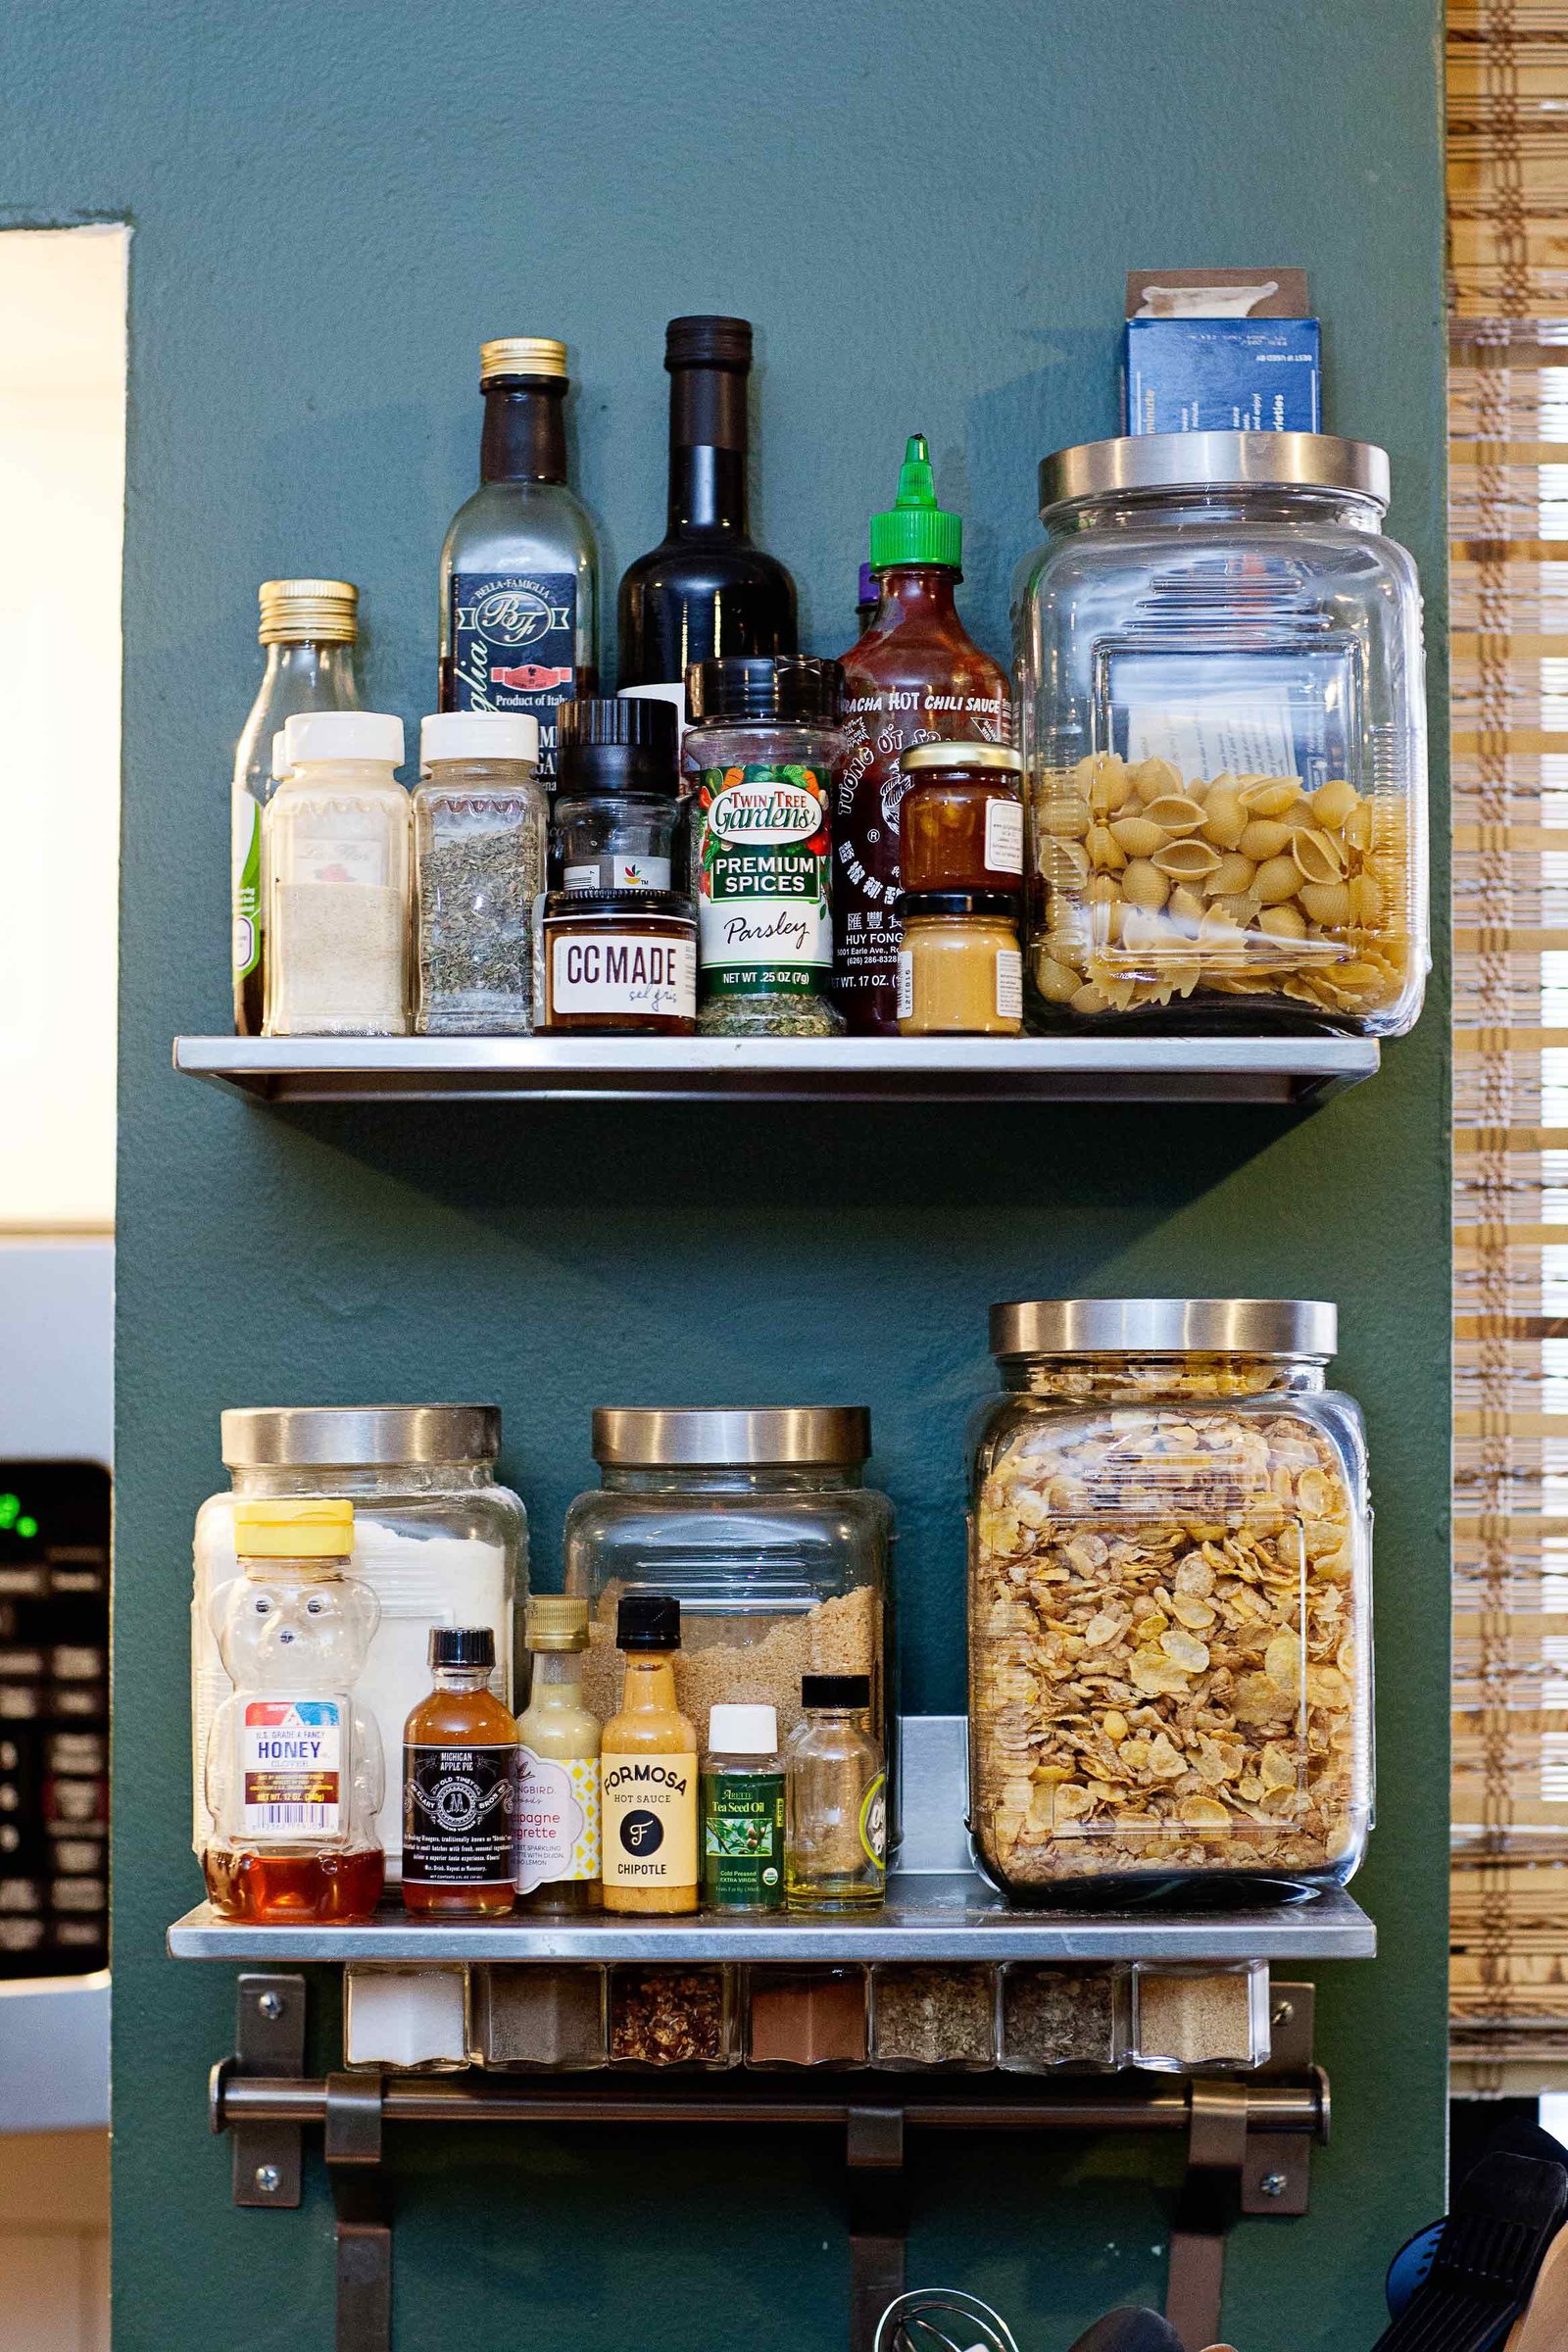 Floating shelves with spices and glass jars with foods.